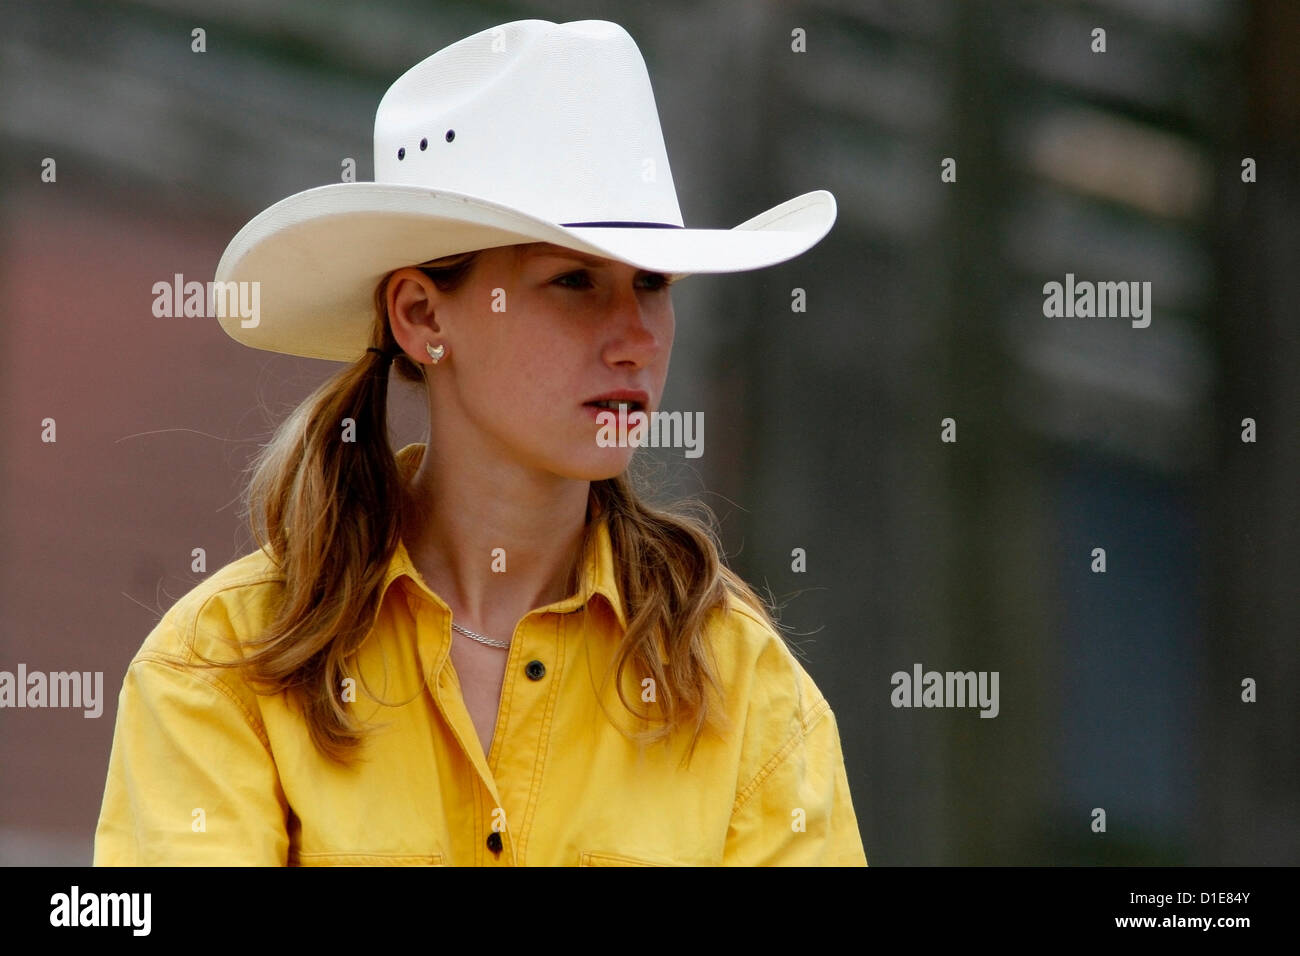 cowgirl in a yellow shirt and with hat Stock Photo